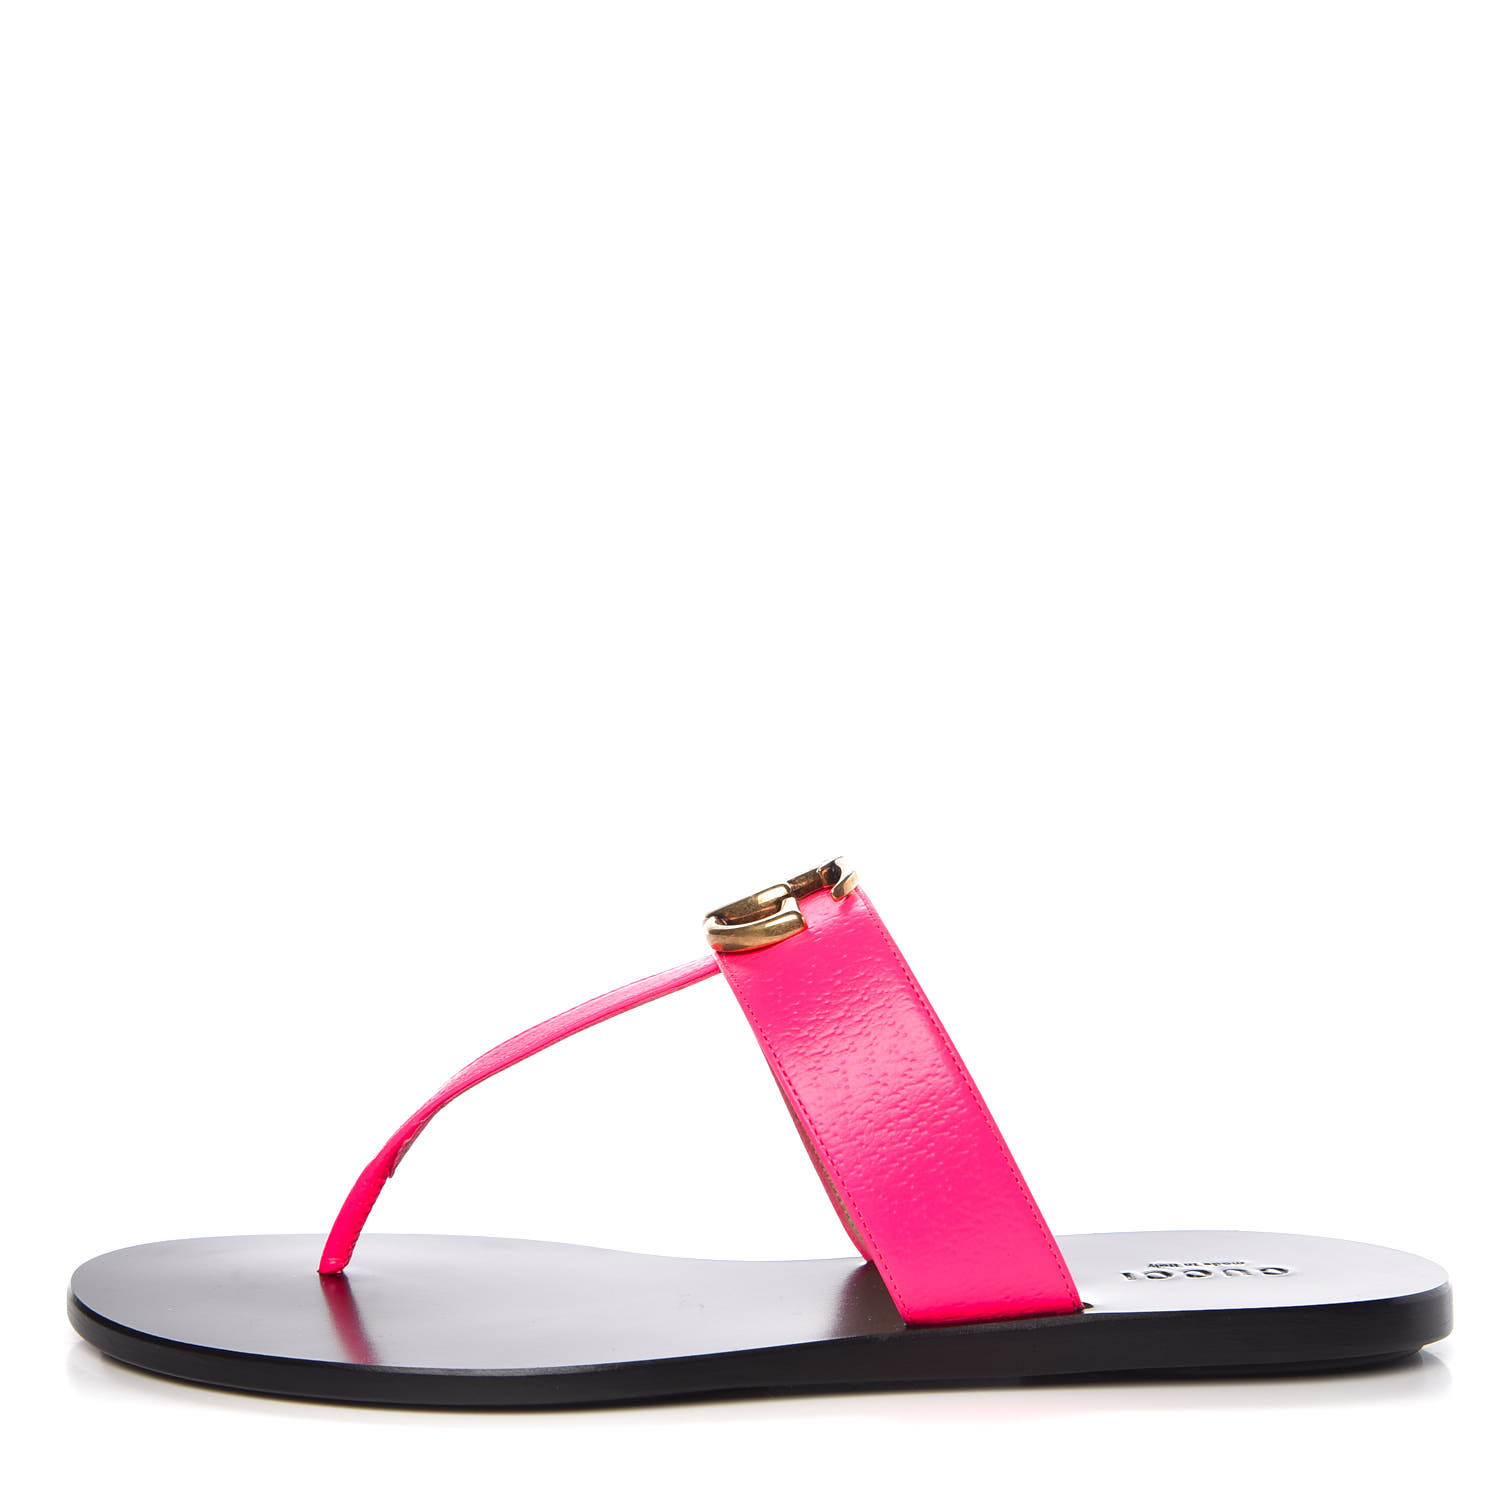 gucci neon pink sandals, OFF 75%,www 